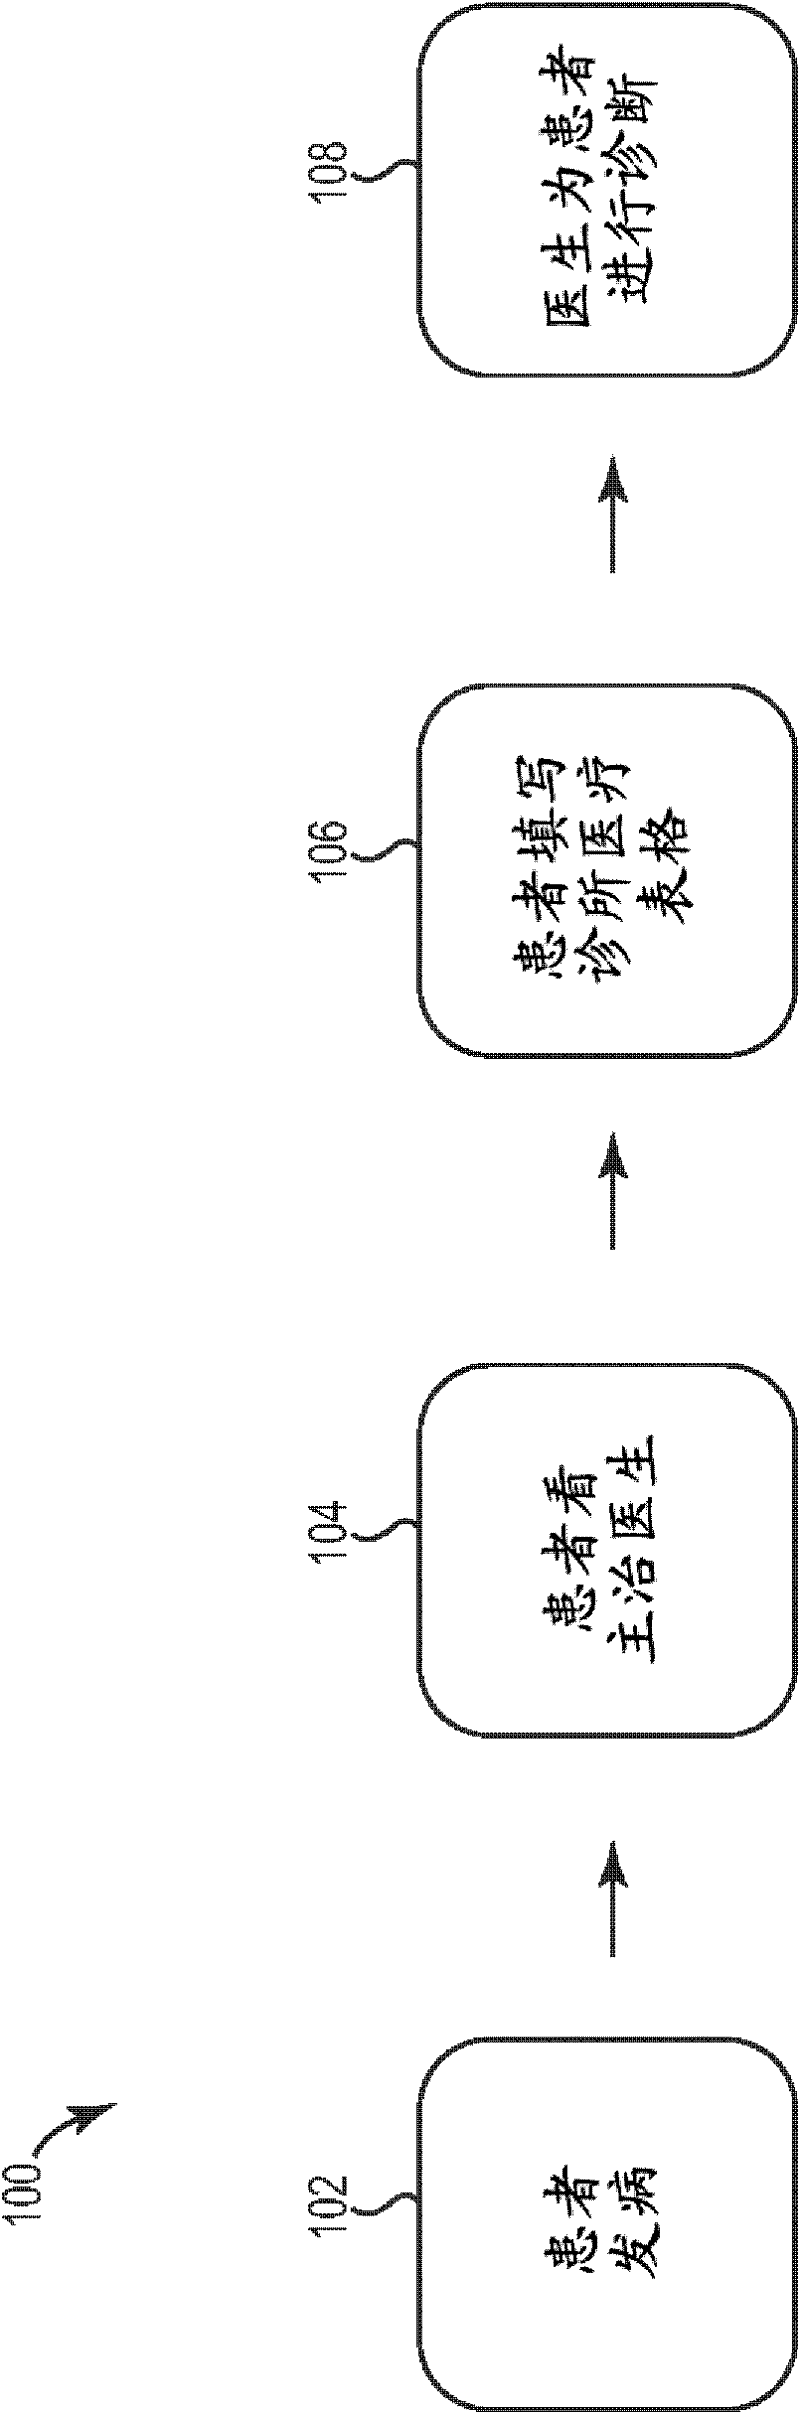 Medical history diagnosis system and method